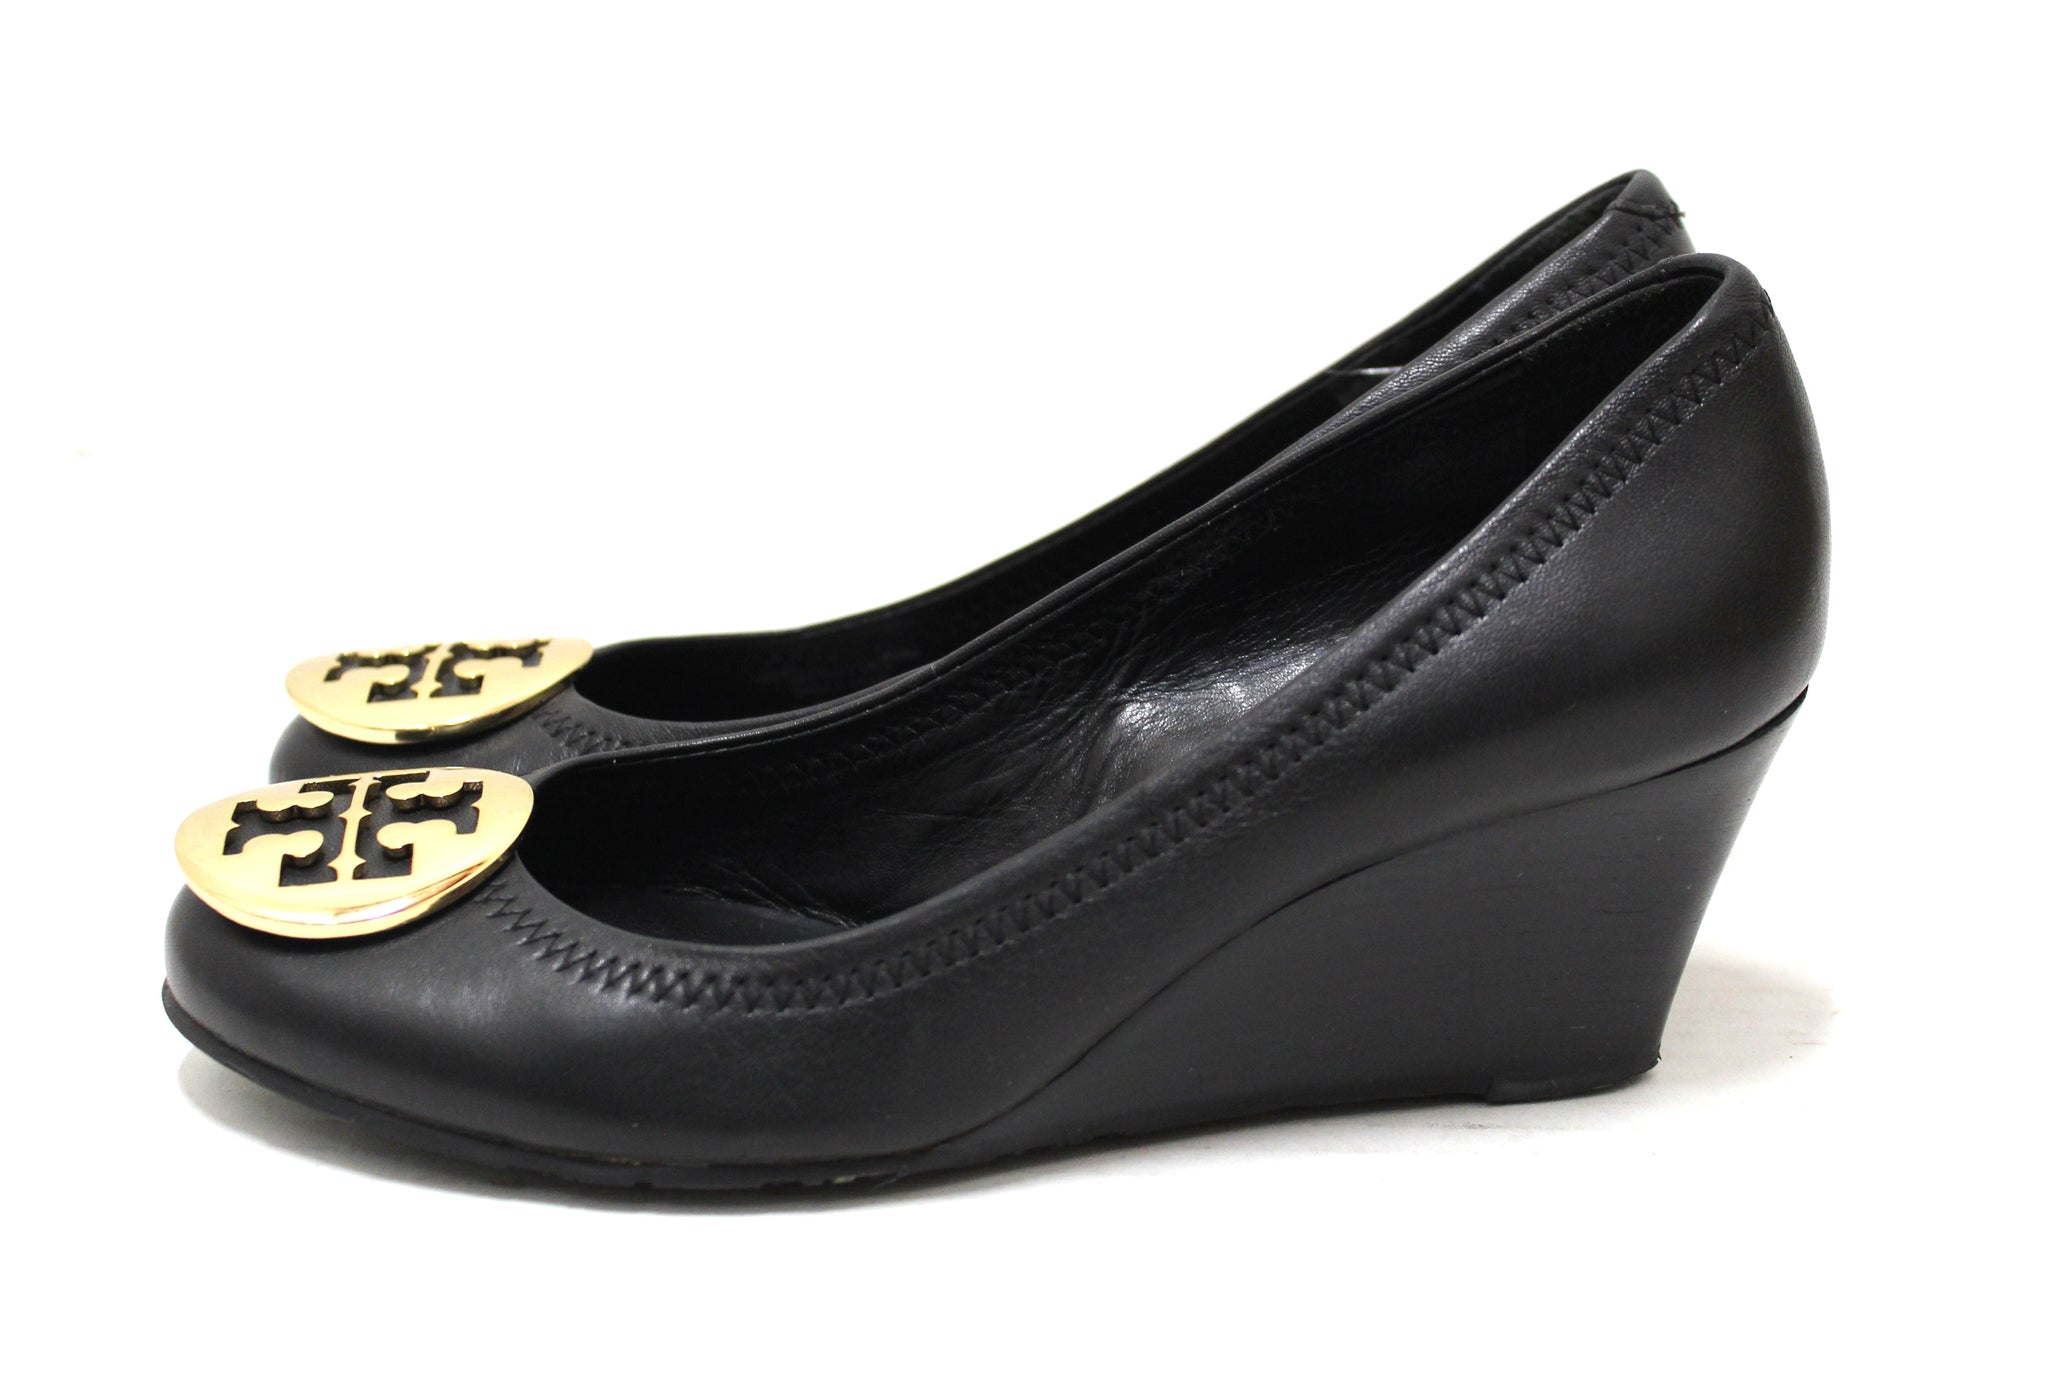 Tory Burch Black Leather Sally Wedge Size 6 – Italy Station